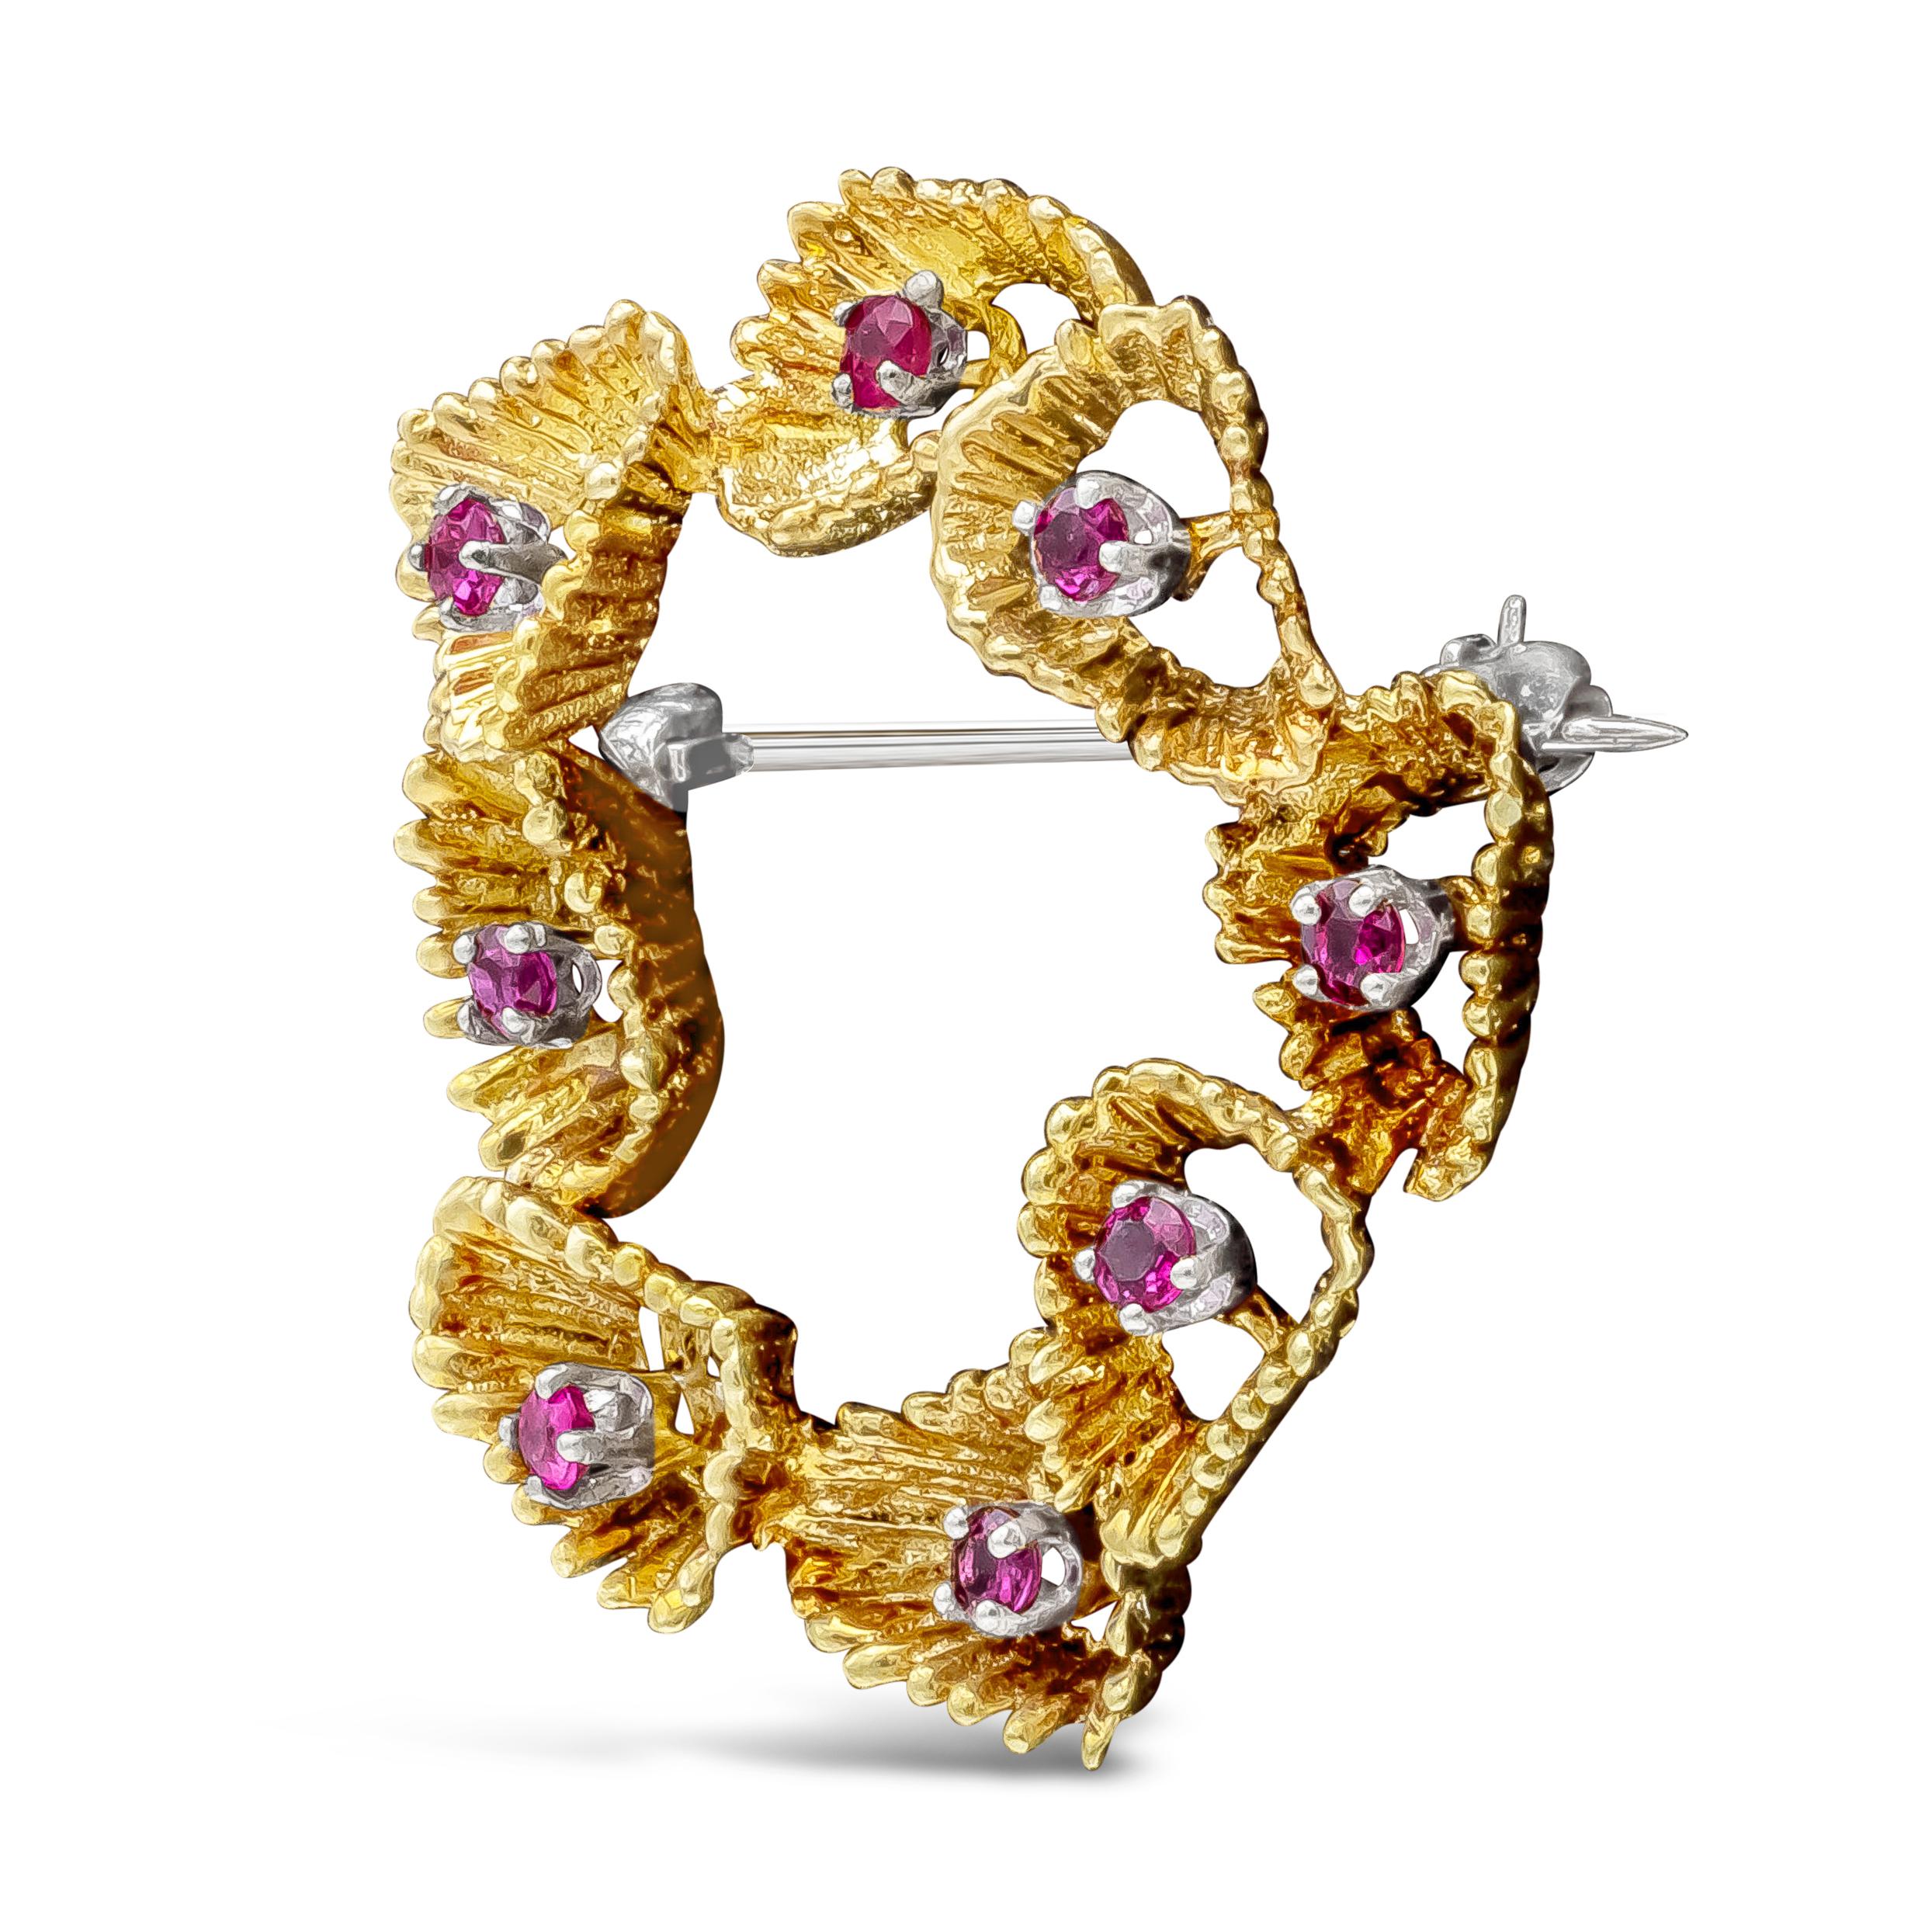 A unique and well-crafted antique brooch in a coral reef design, accented with round cut rubies weighing 0.60 carat total. Made with 18K yellow gold. Perfect complement to any outfit.